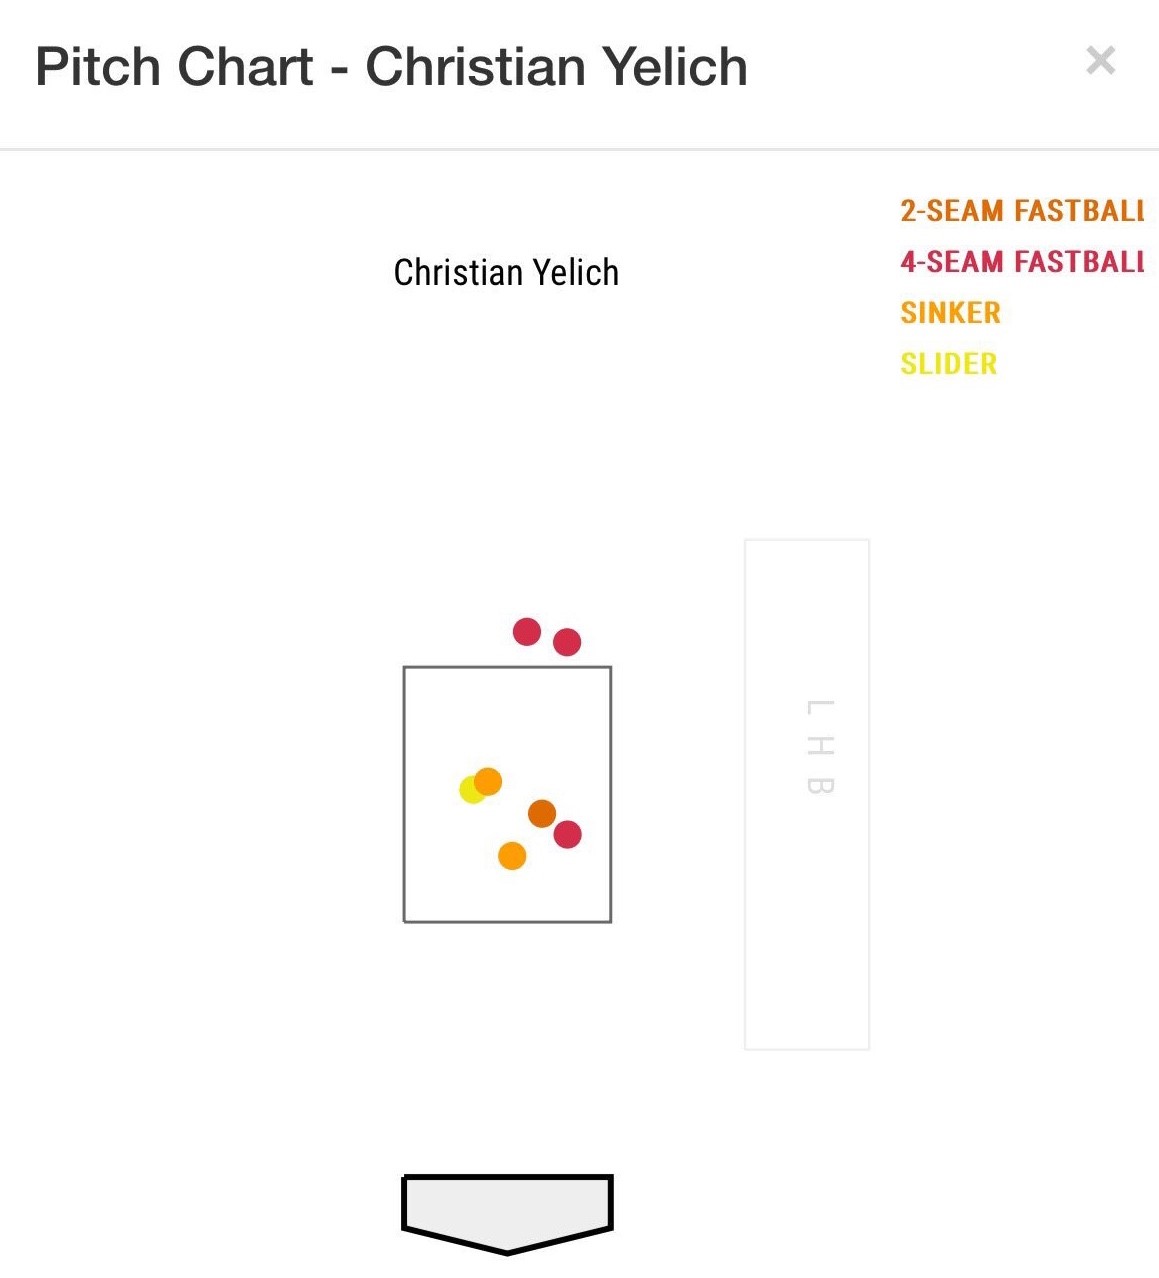 Of the 7 HR's allowed to Christian  Yelich, 5 have been grooved pitches down the middle.